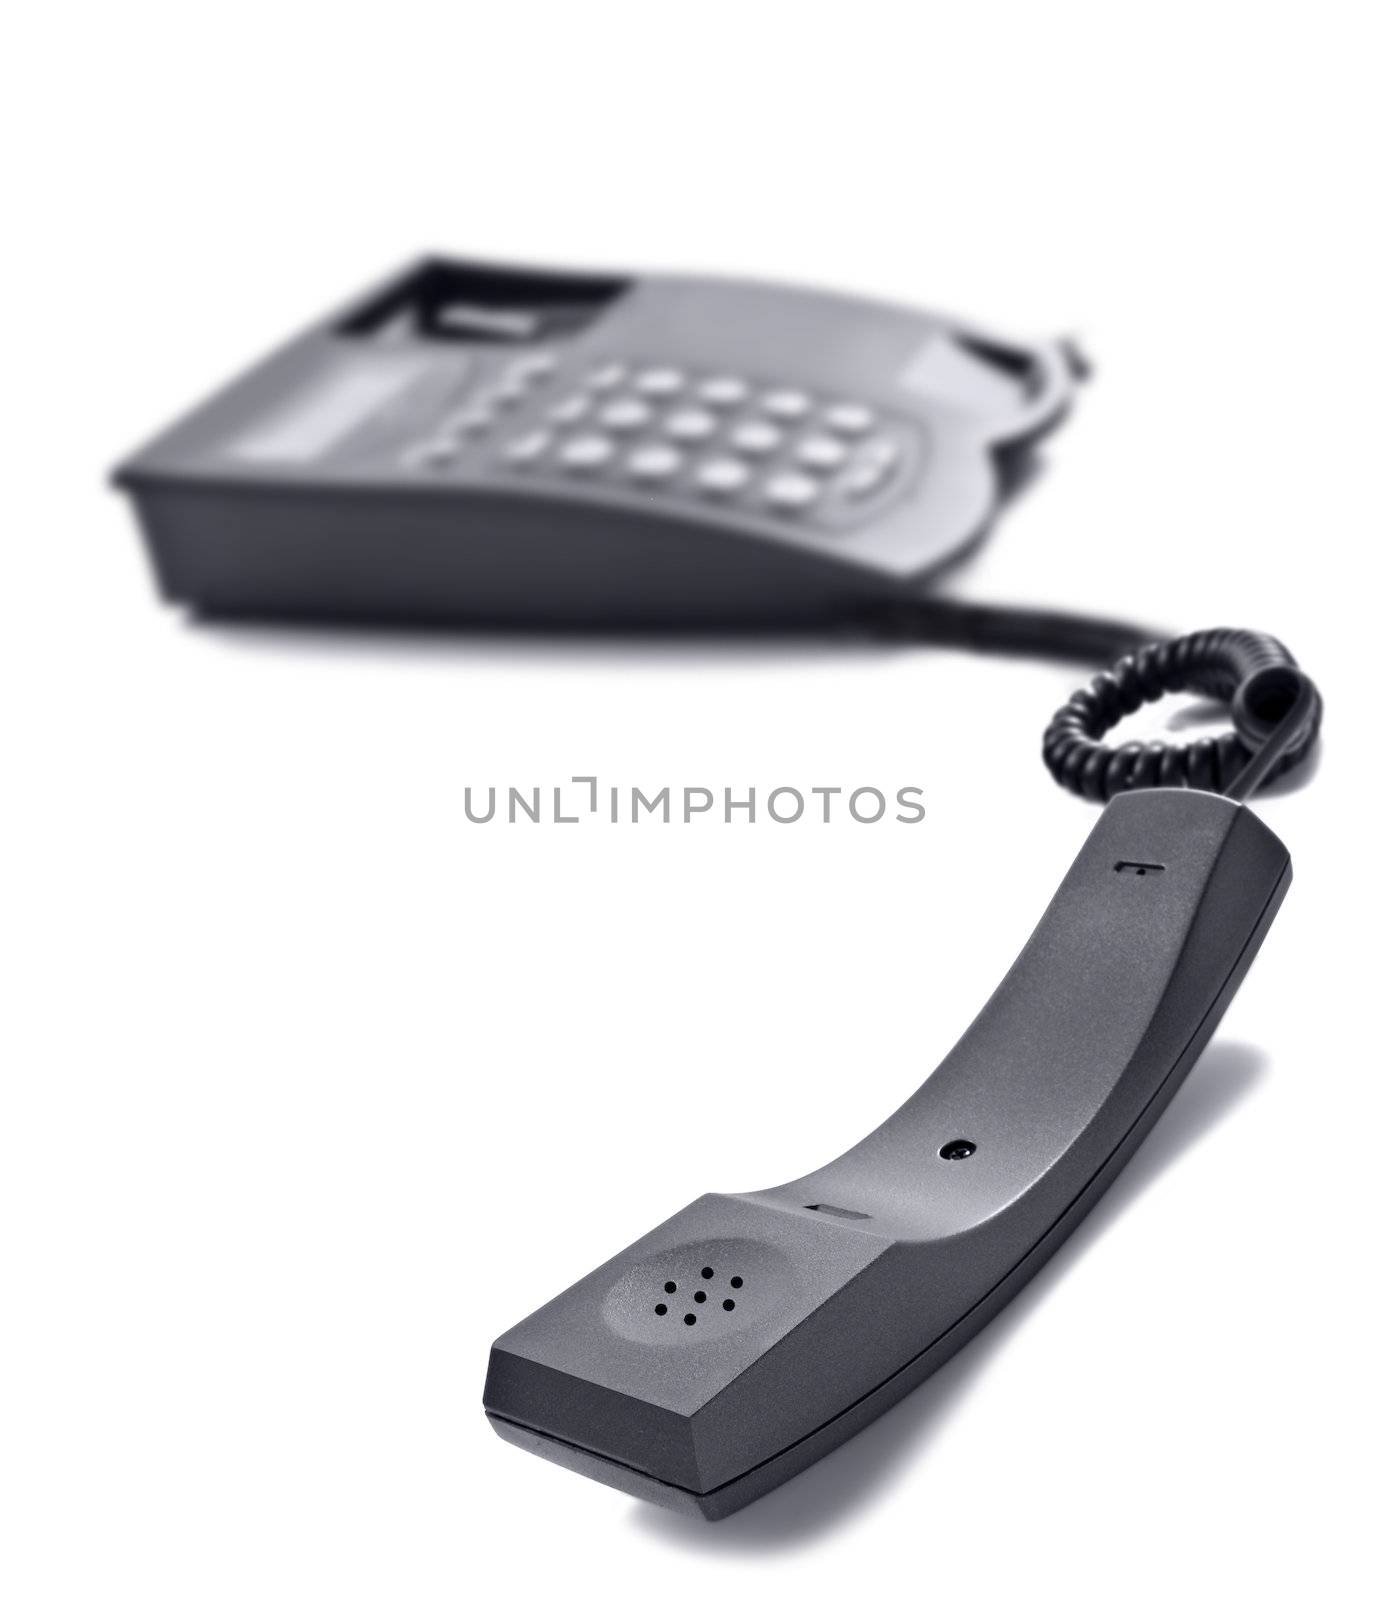 Black telephone on white with space for text